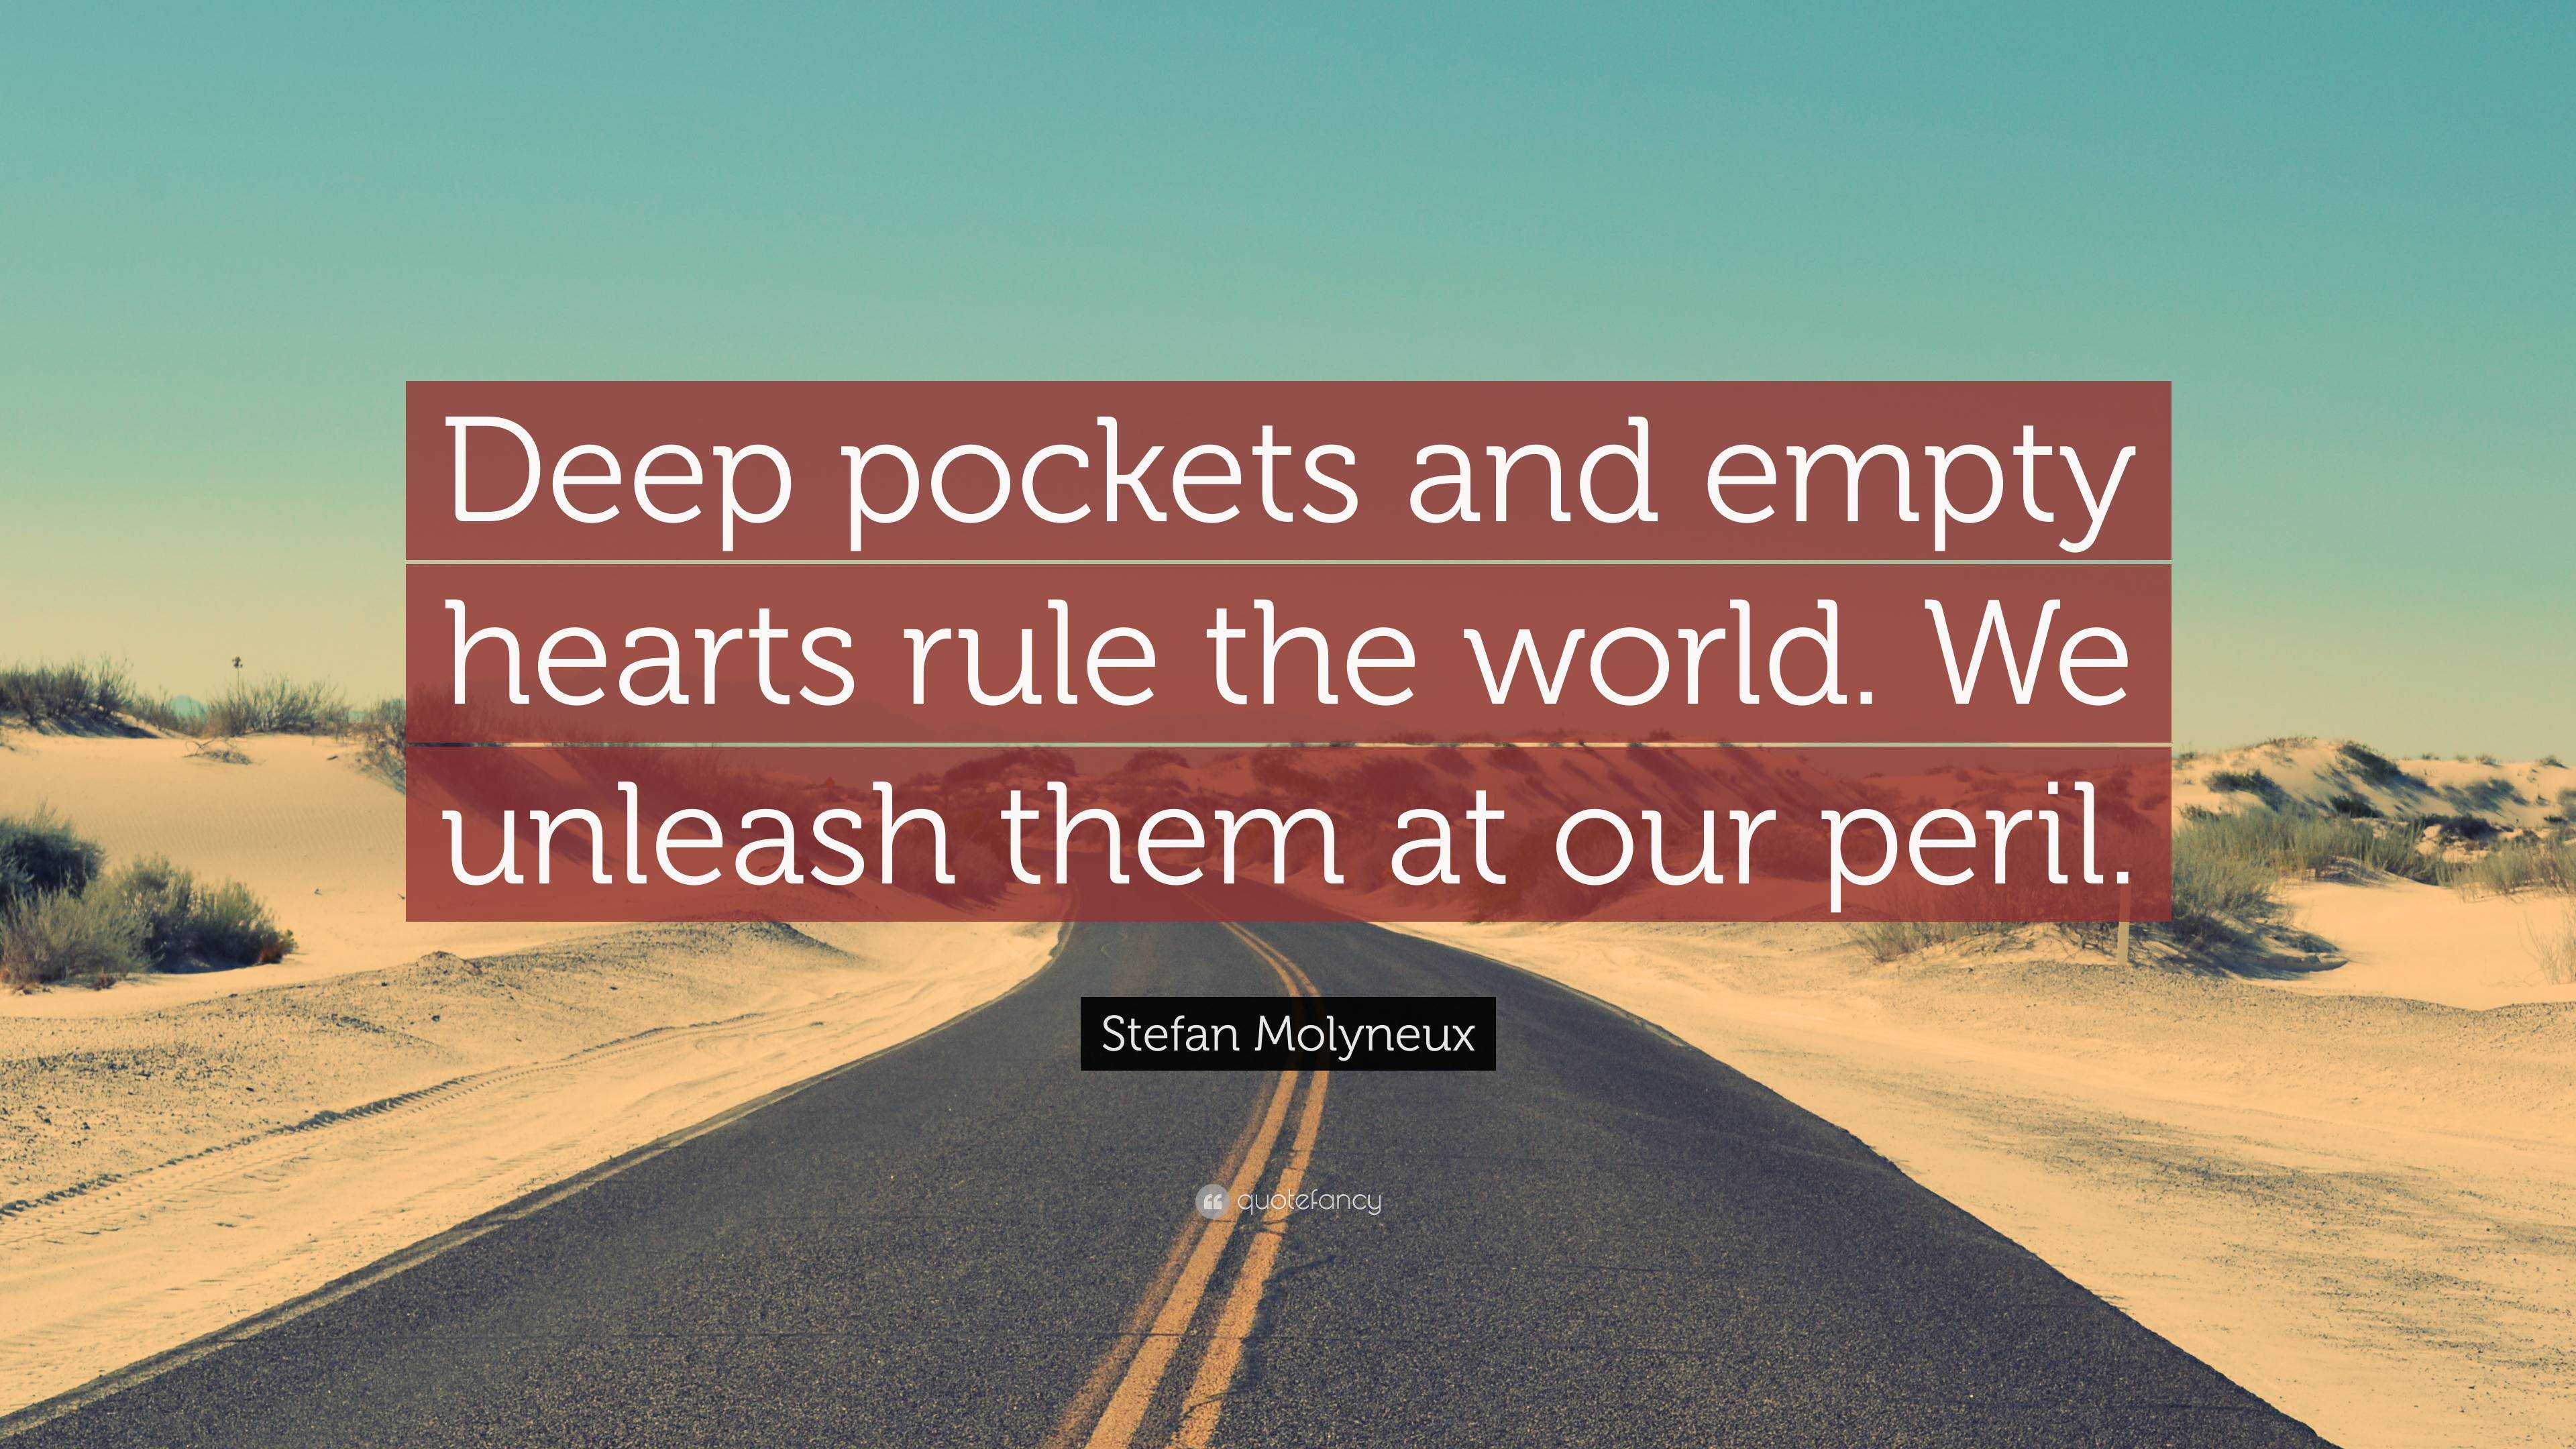 https://quotefancy.com/media/wallpaper/3840x2160/6404510-Stefan-Molyneux-Quote-Deep-pockets-and-empty-hearts-rule-the-world.jpg